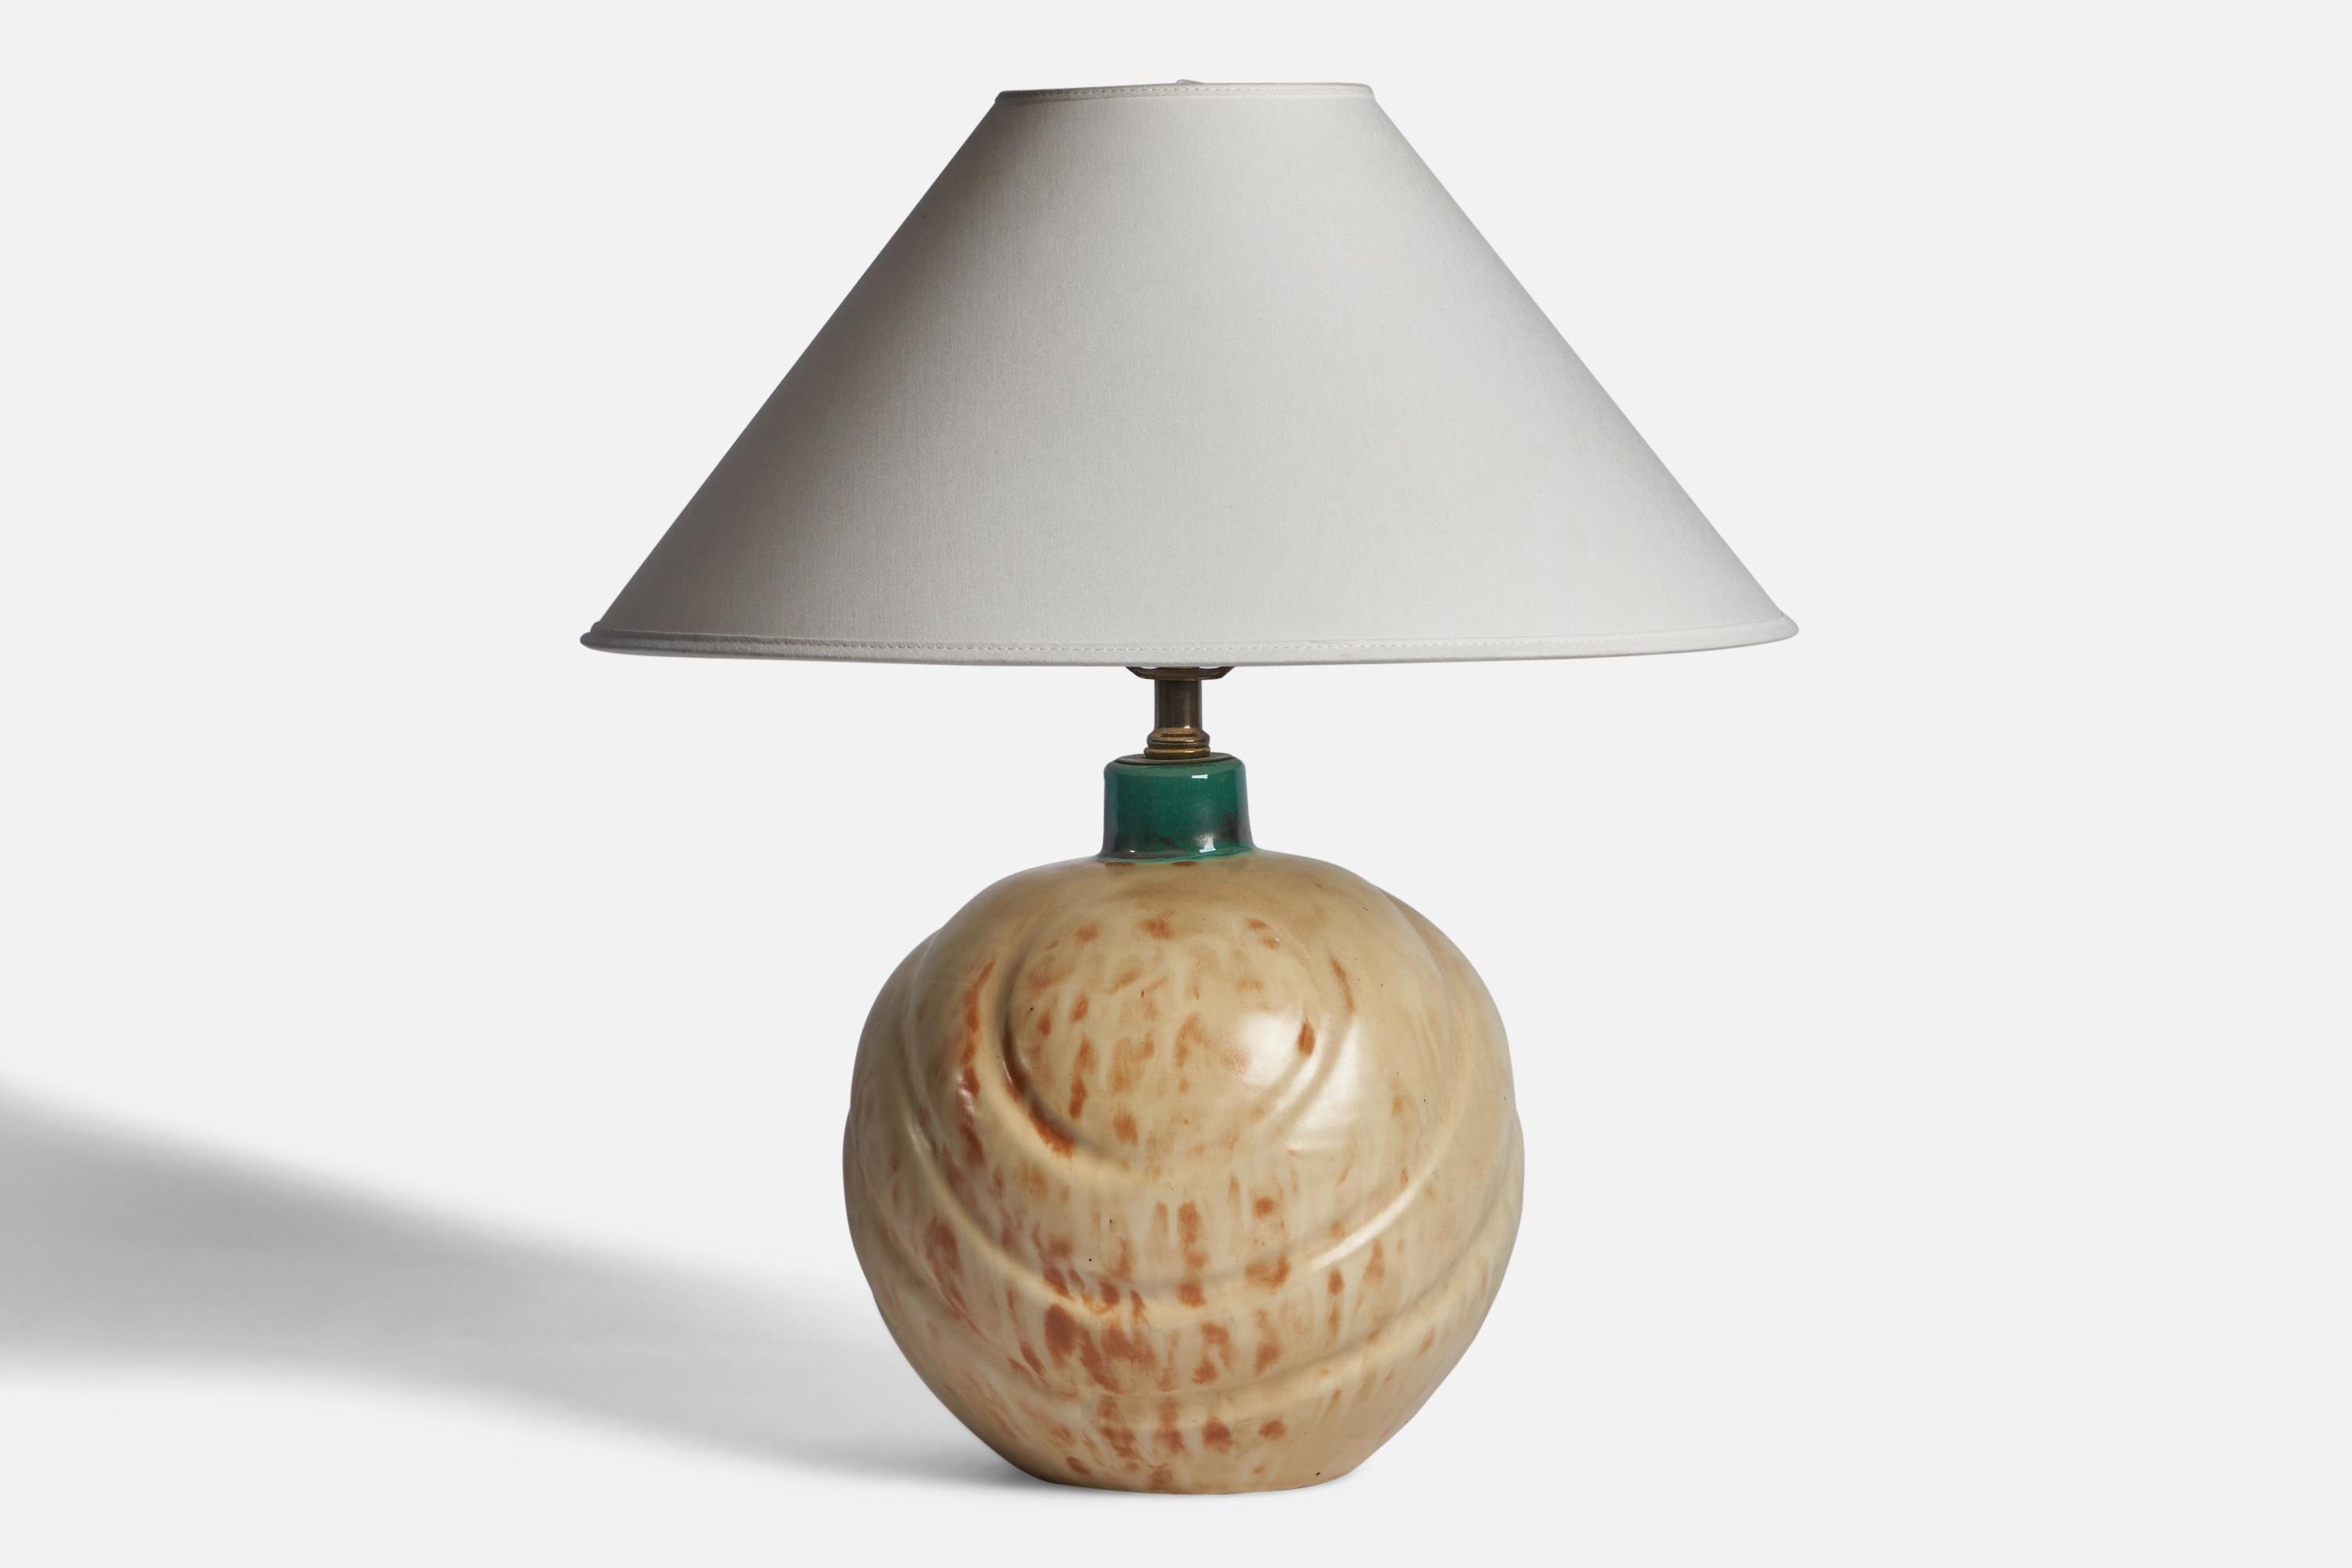 A green and beige-glazed earthenware table lamp designed and produced by Upsala Ekeby, Sweden, 1930s.

Dimensions of Lamp (inches): 13.25” H x 8.8” Diameter
Dimensions of Shade (inches): 4.5” Top Diameter x 16” Bottom Diameter x 7.15” H 
Dimensions